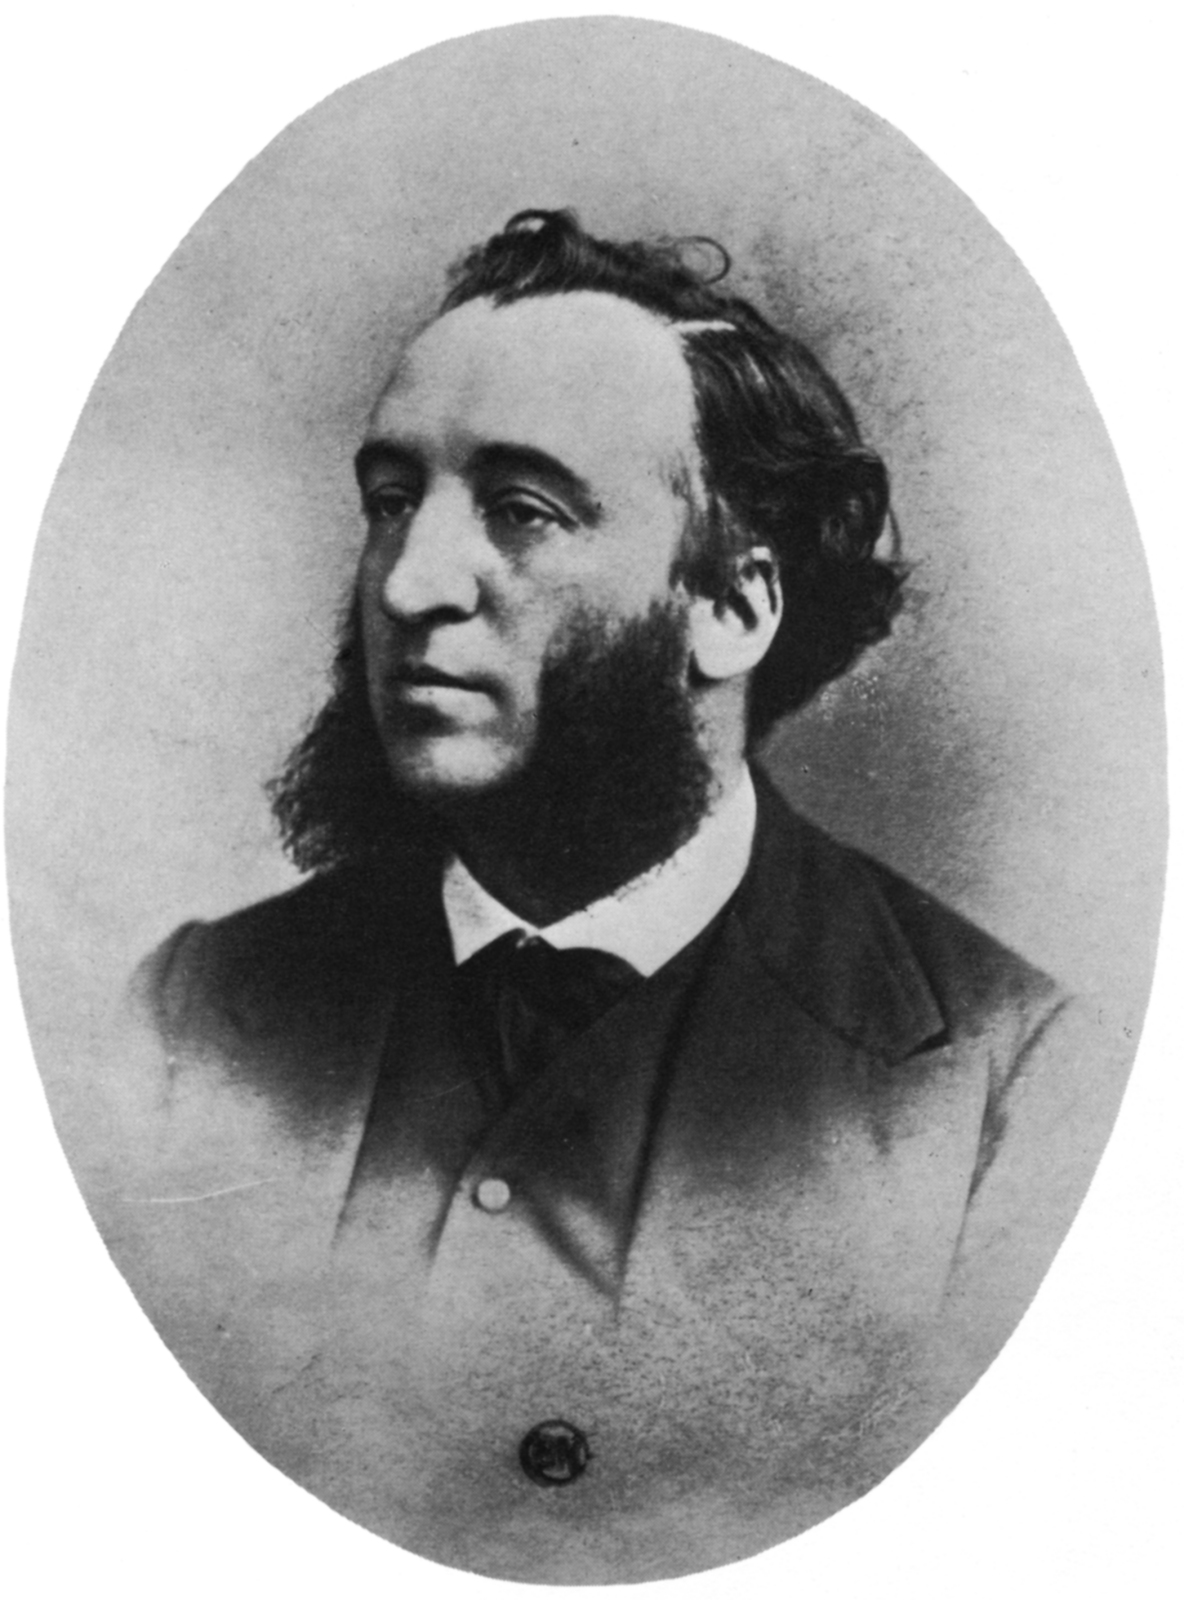 Jules Ferry, Prime Minister of France